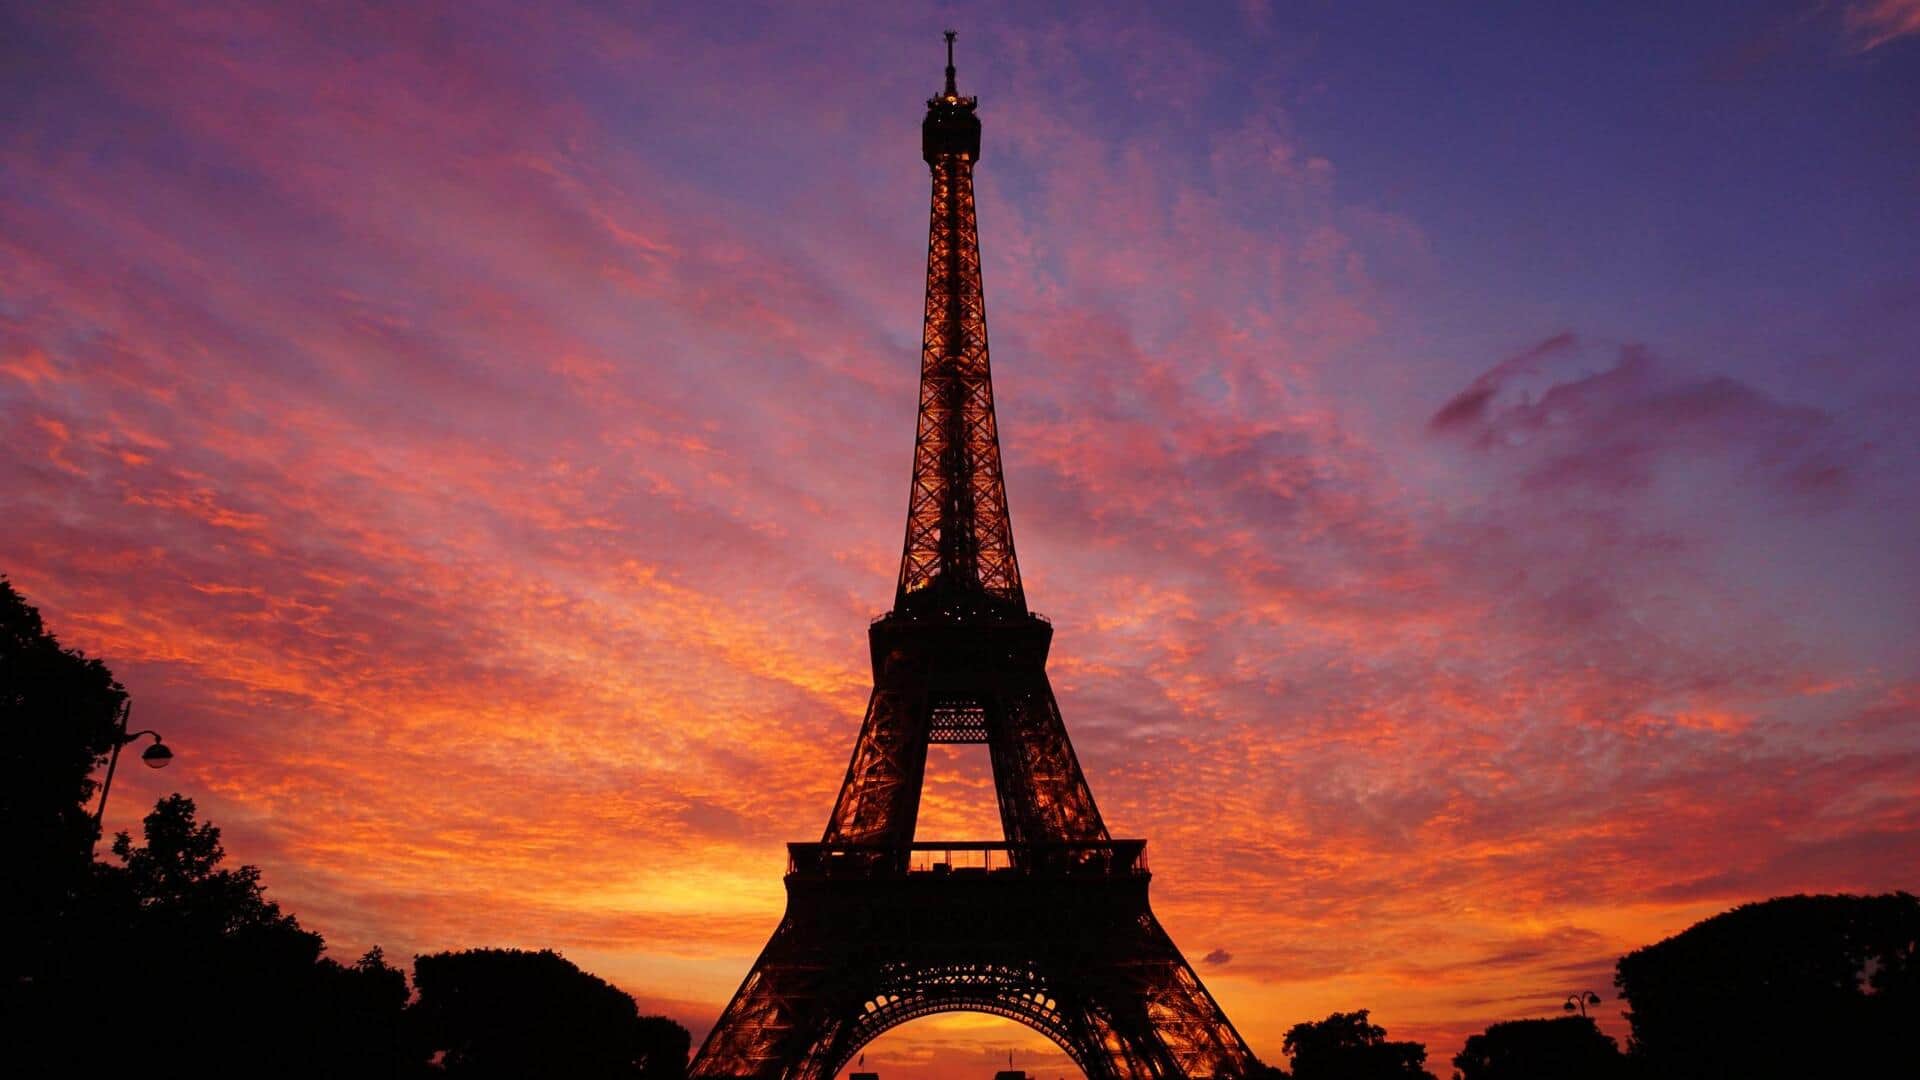 Top recommendations for a beautiful Parisian sunset picnic